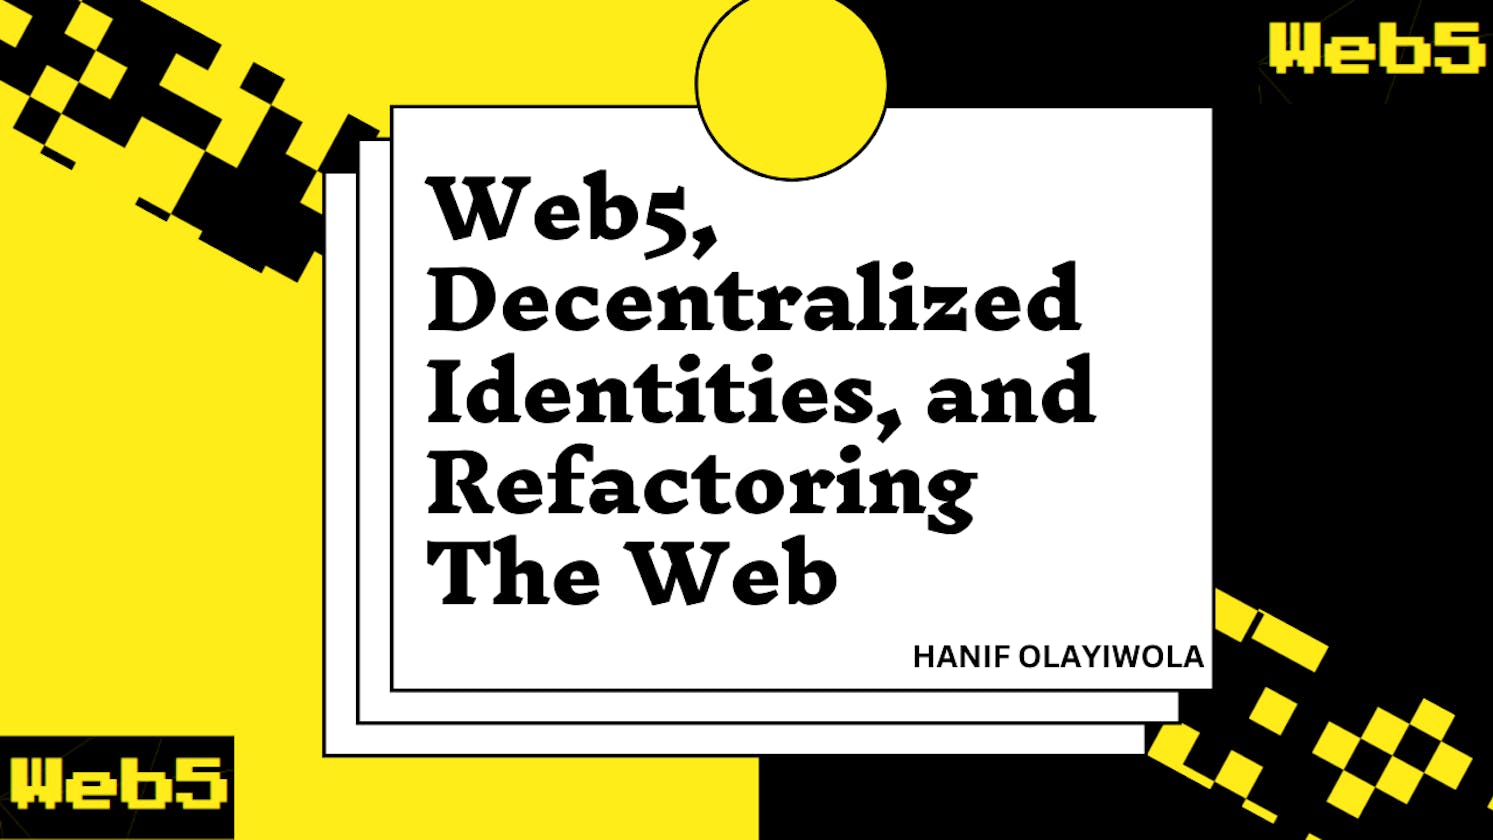 Web5, Decentralized Identities, and Refactoring The Web